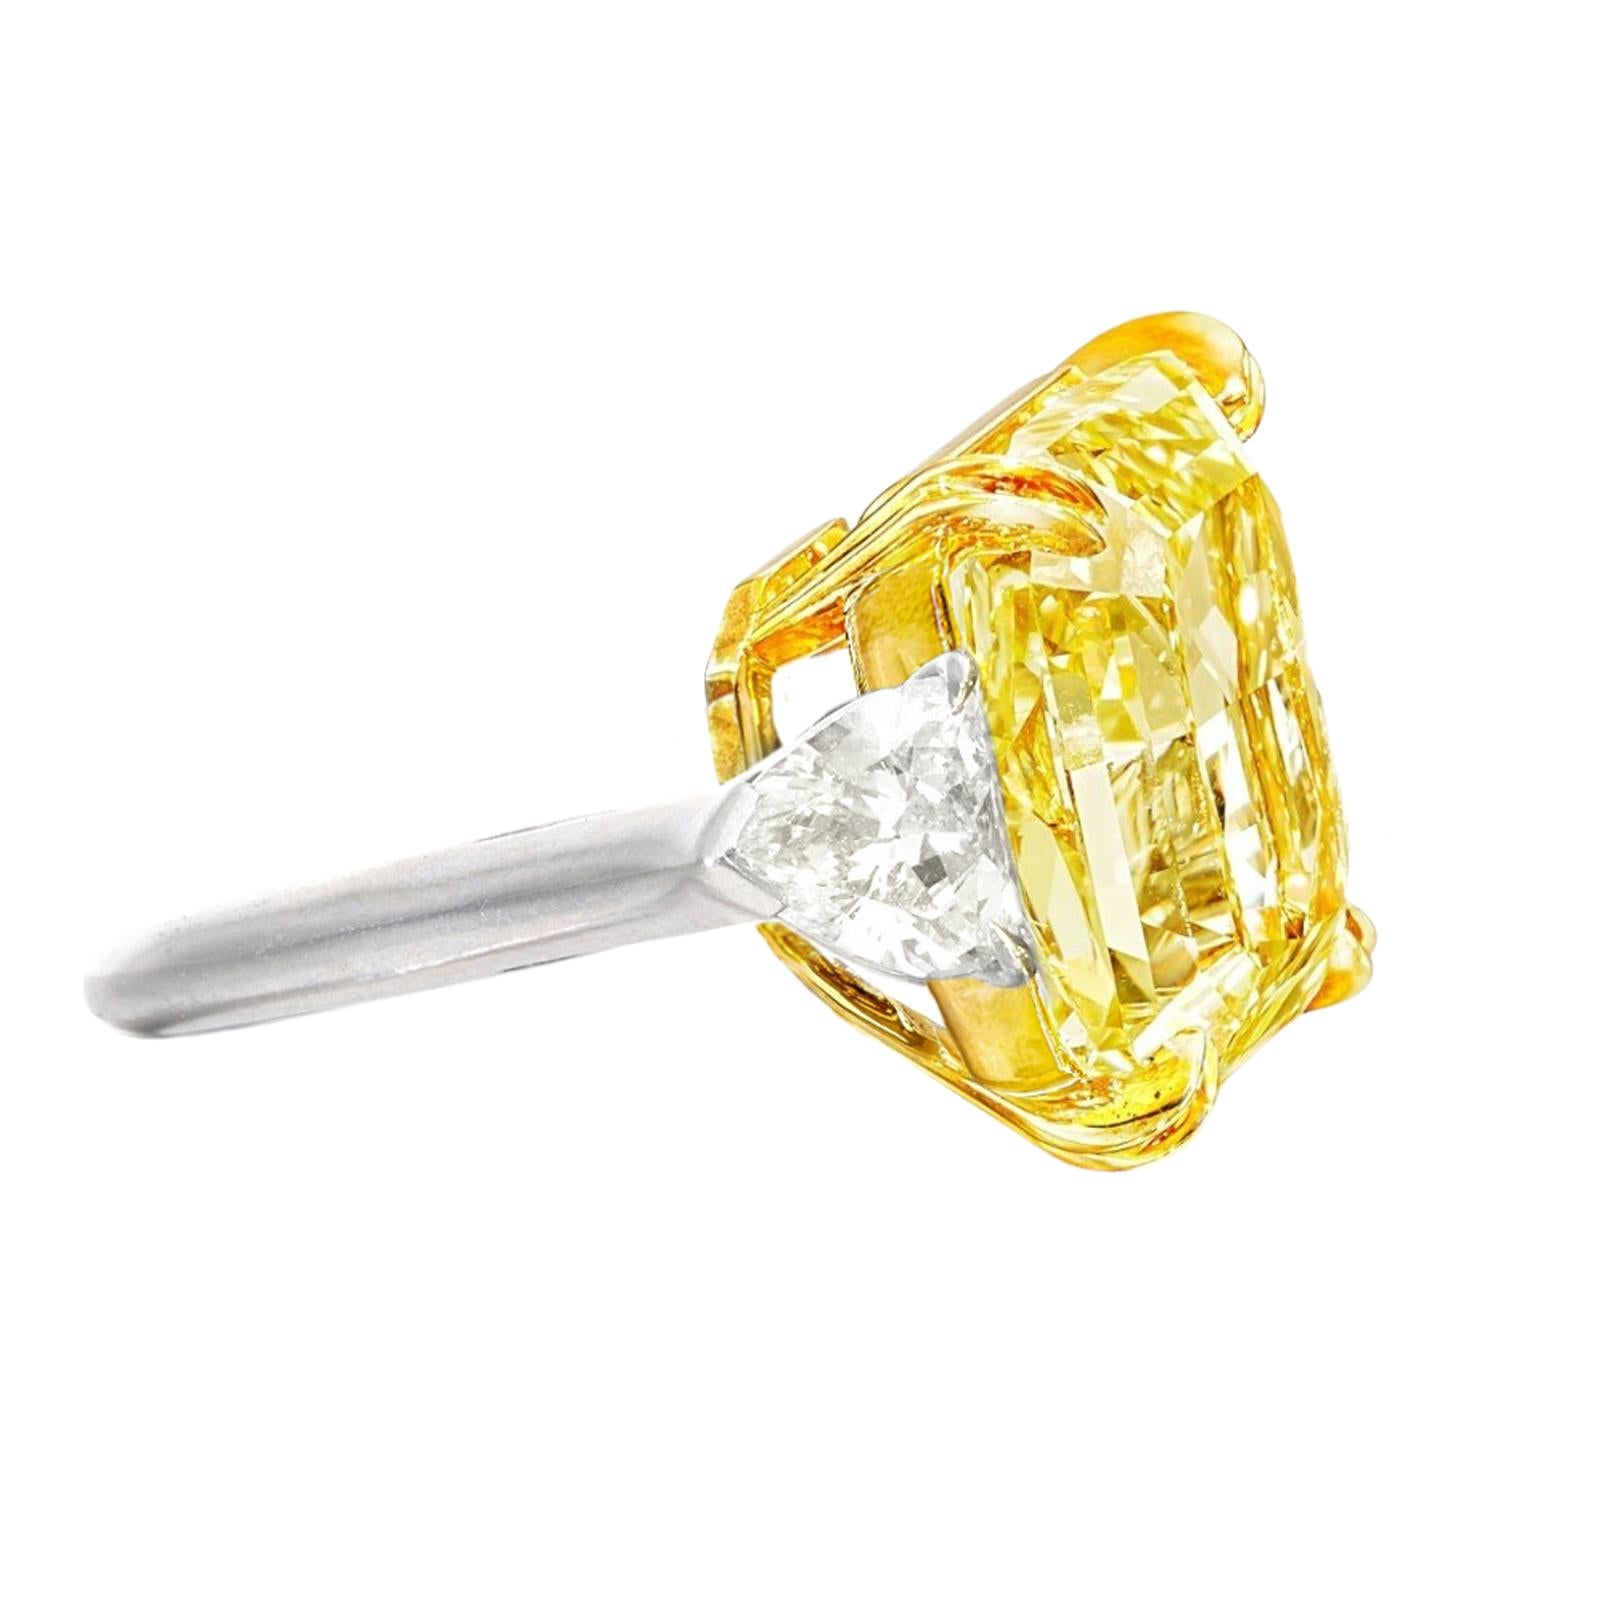 Contemporary GIA Certified 10.57 Ct Fancy Yellow Diamond Ring with Trillion For Sale